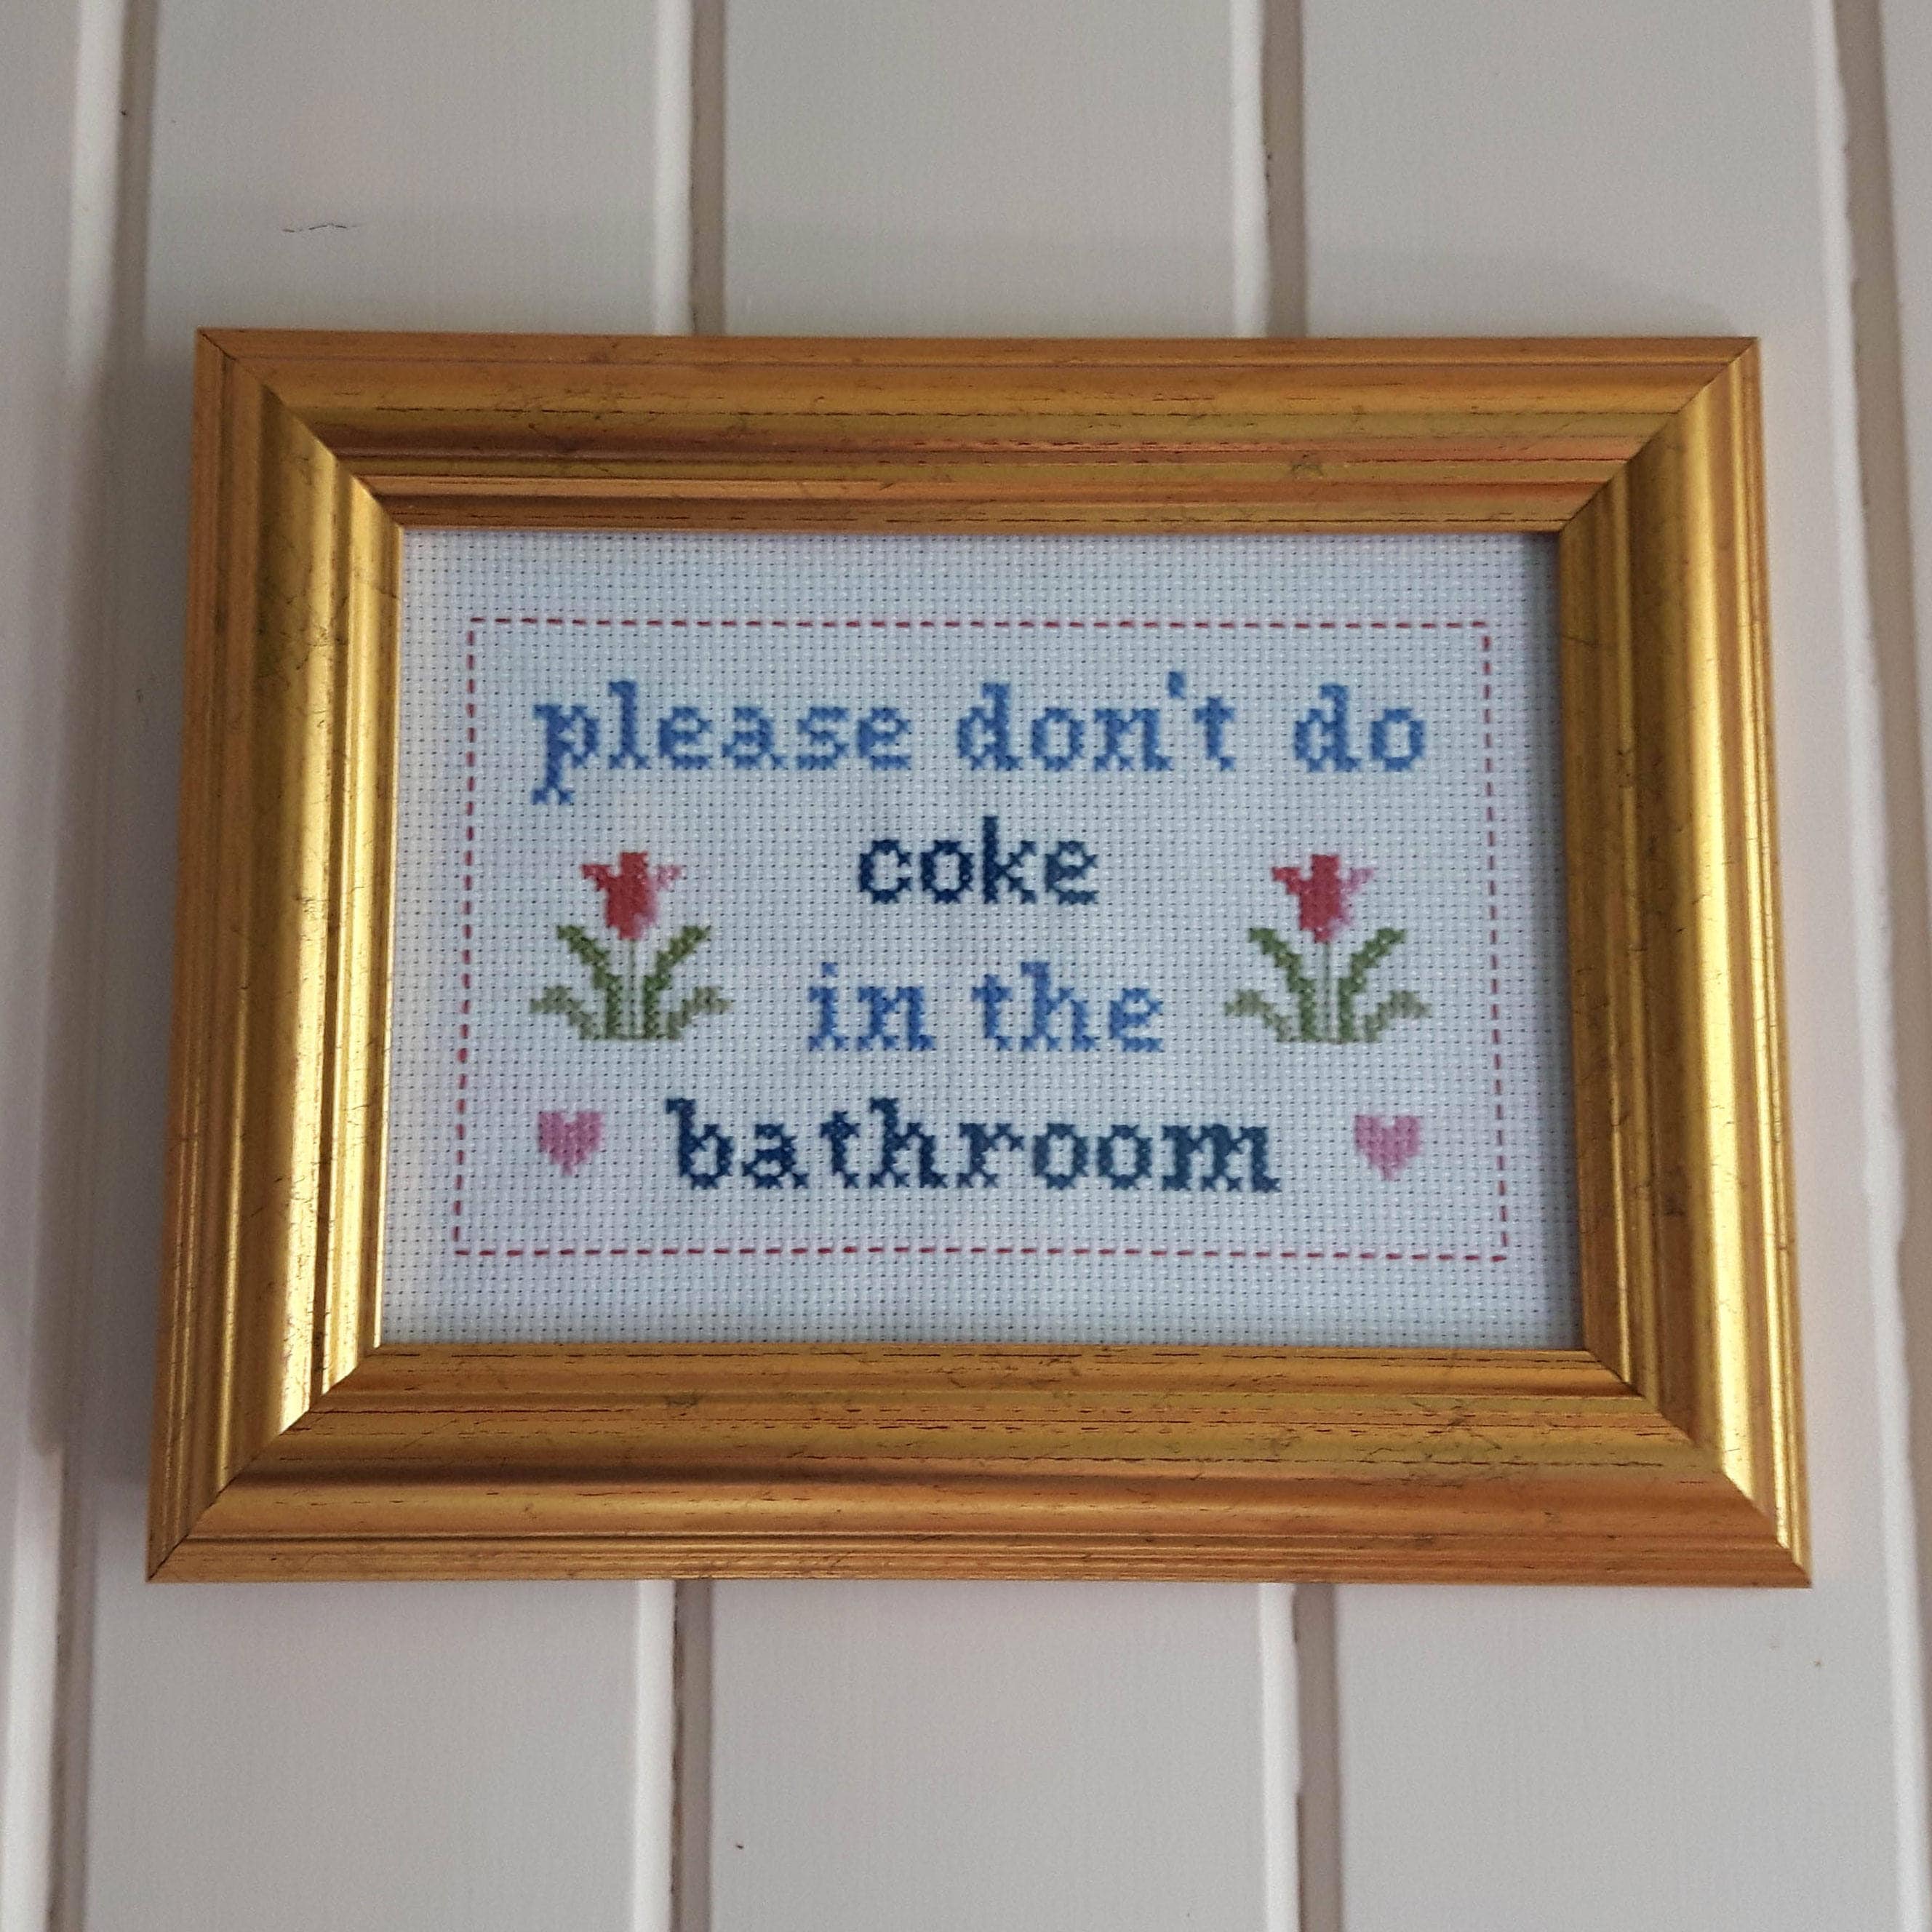 No Cocaine In The Bathroom Stitch - Say No to Illegal Activities